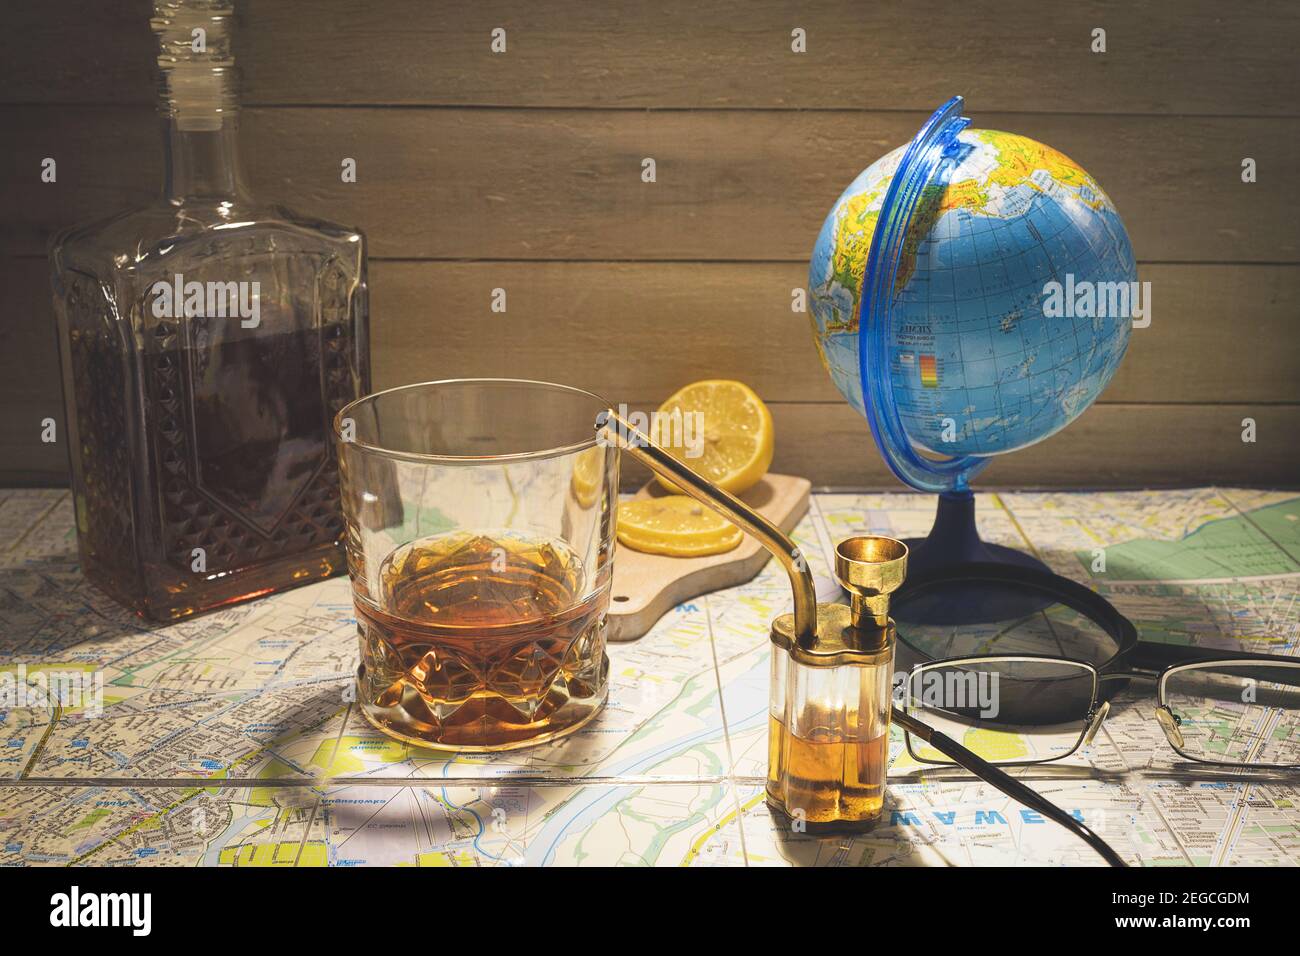 disconnected forget Arab Sarabo Glass bong for smoking marijuana with copy space. Alcohol with lemon and  drugs with a hookah on the table. Bong drug smoking pipe Stock Photo - Alamy